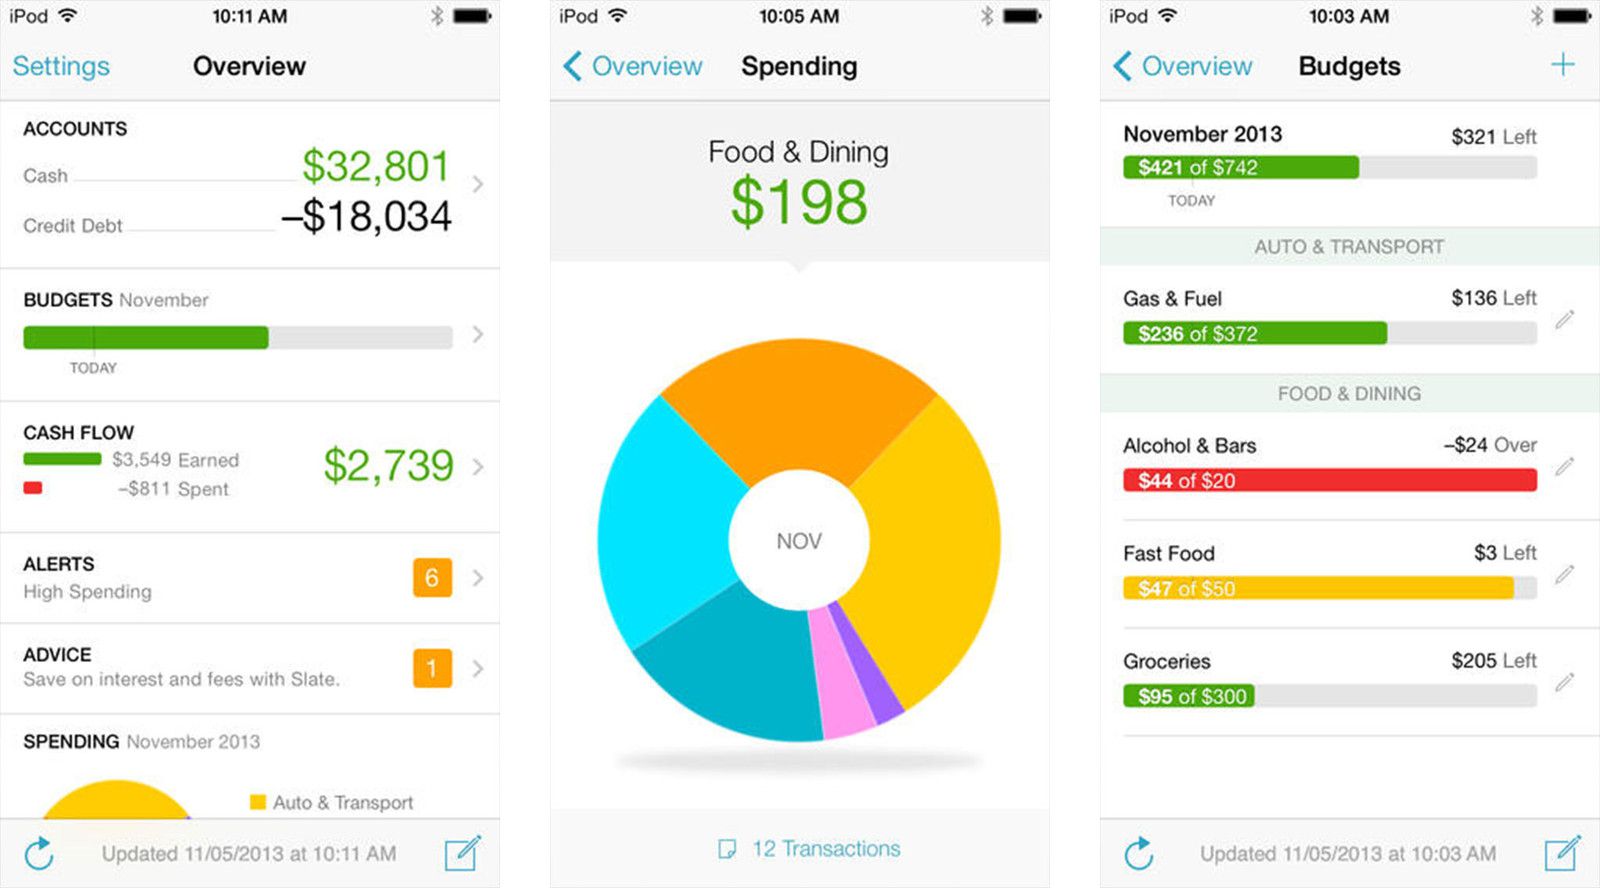 intuit expense tracker